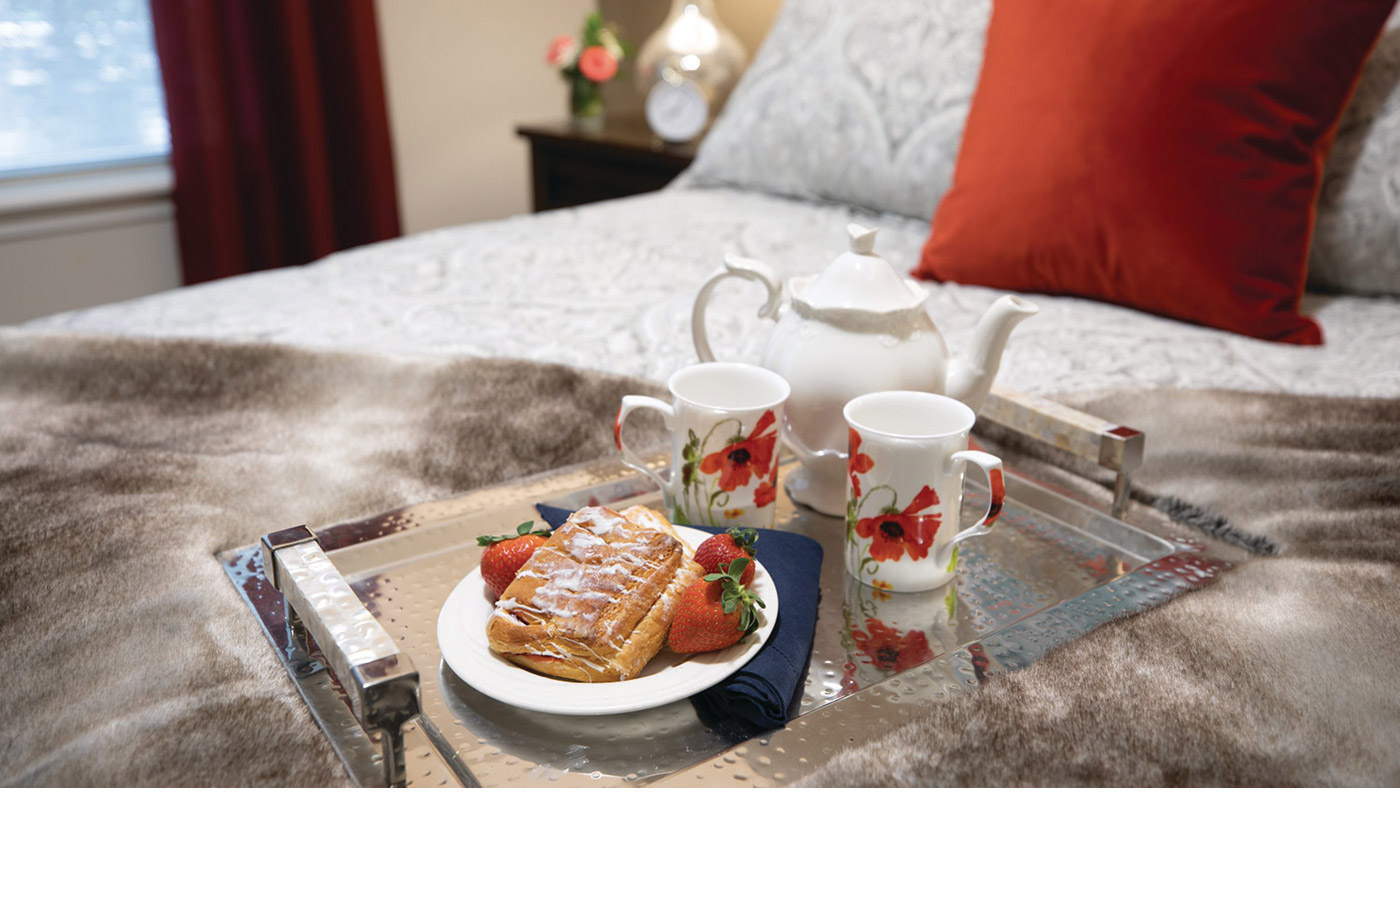 tray carrying a plate of breakfast and coffee on bed